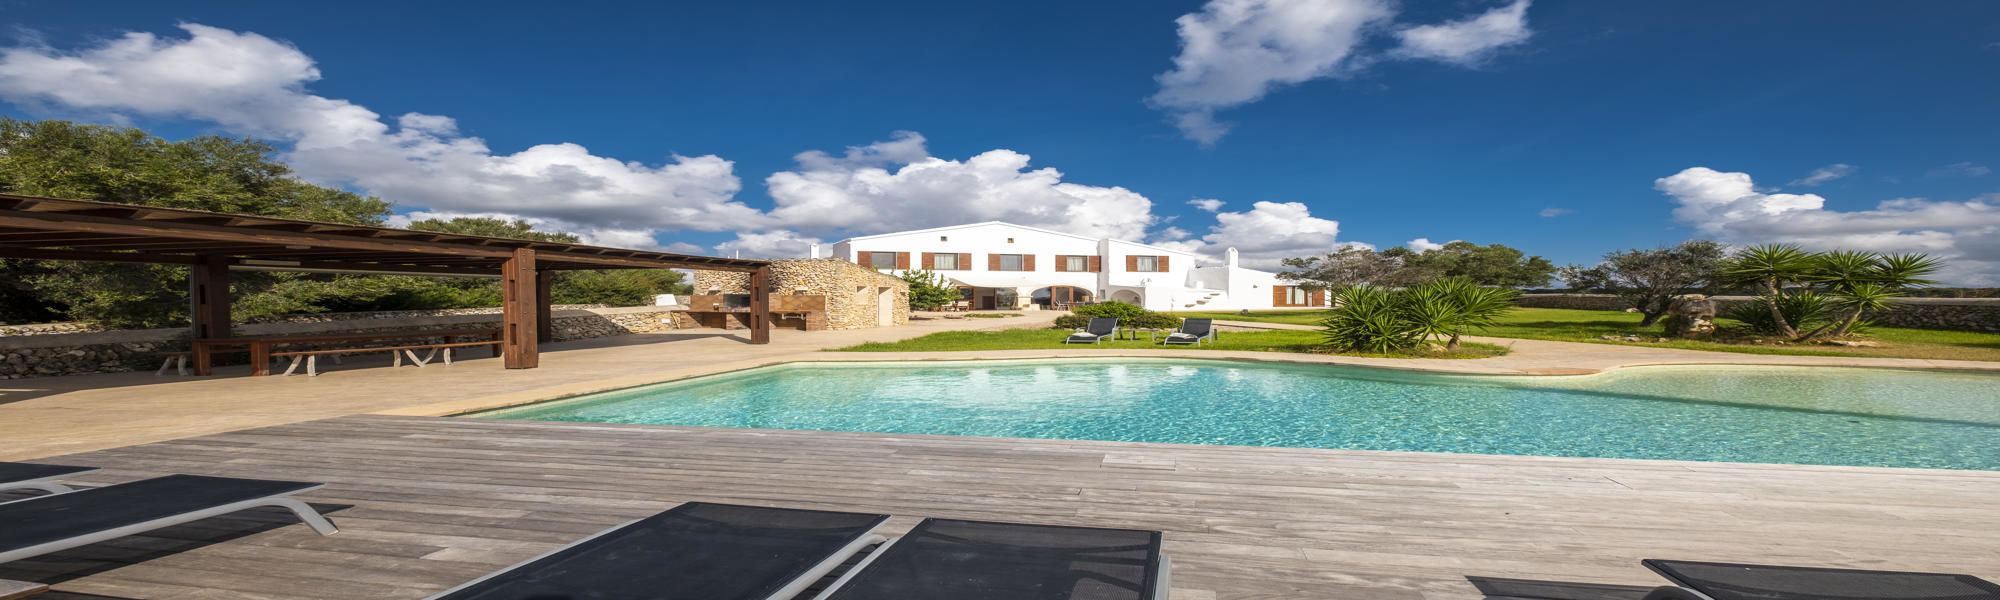 ACCOMMODATIONS - Exclusives in Menorca